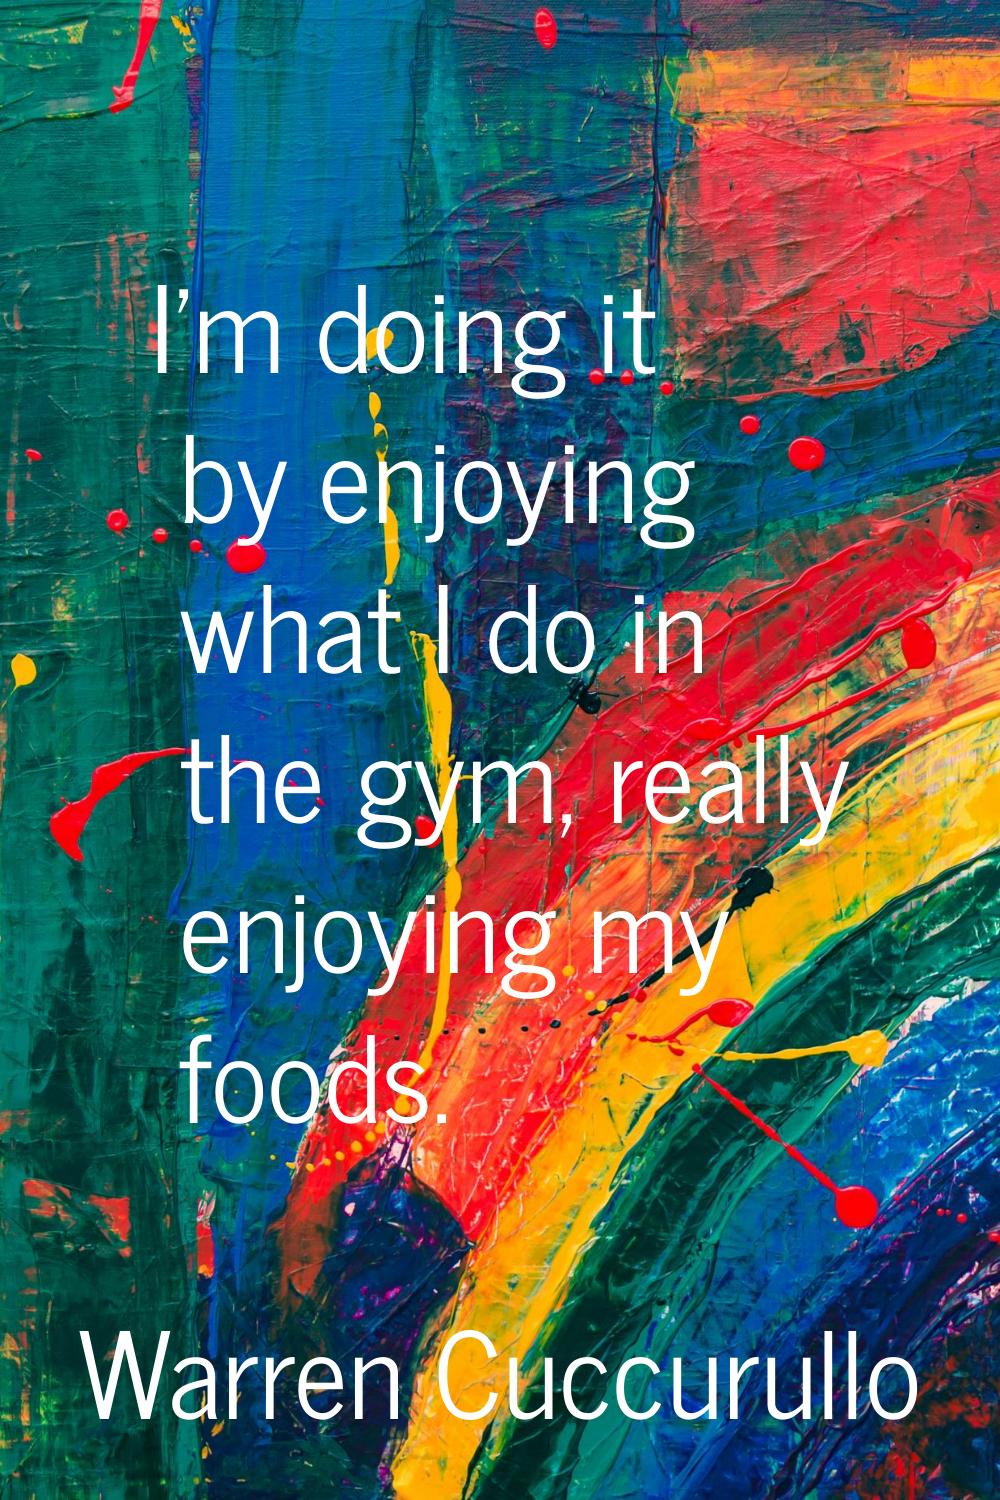 I'm doing it by enjoying what I do in the gym, really enjoying my foods.